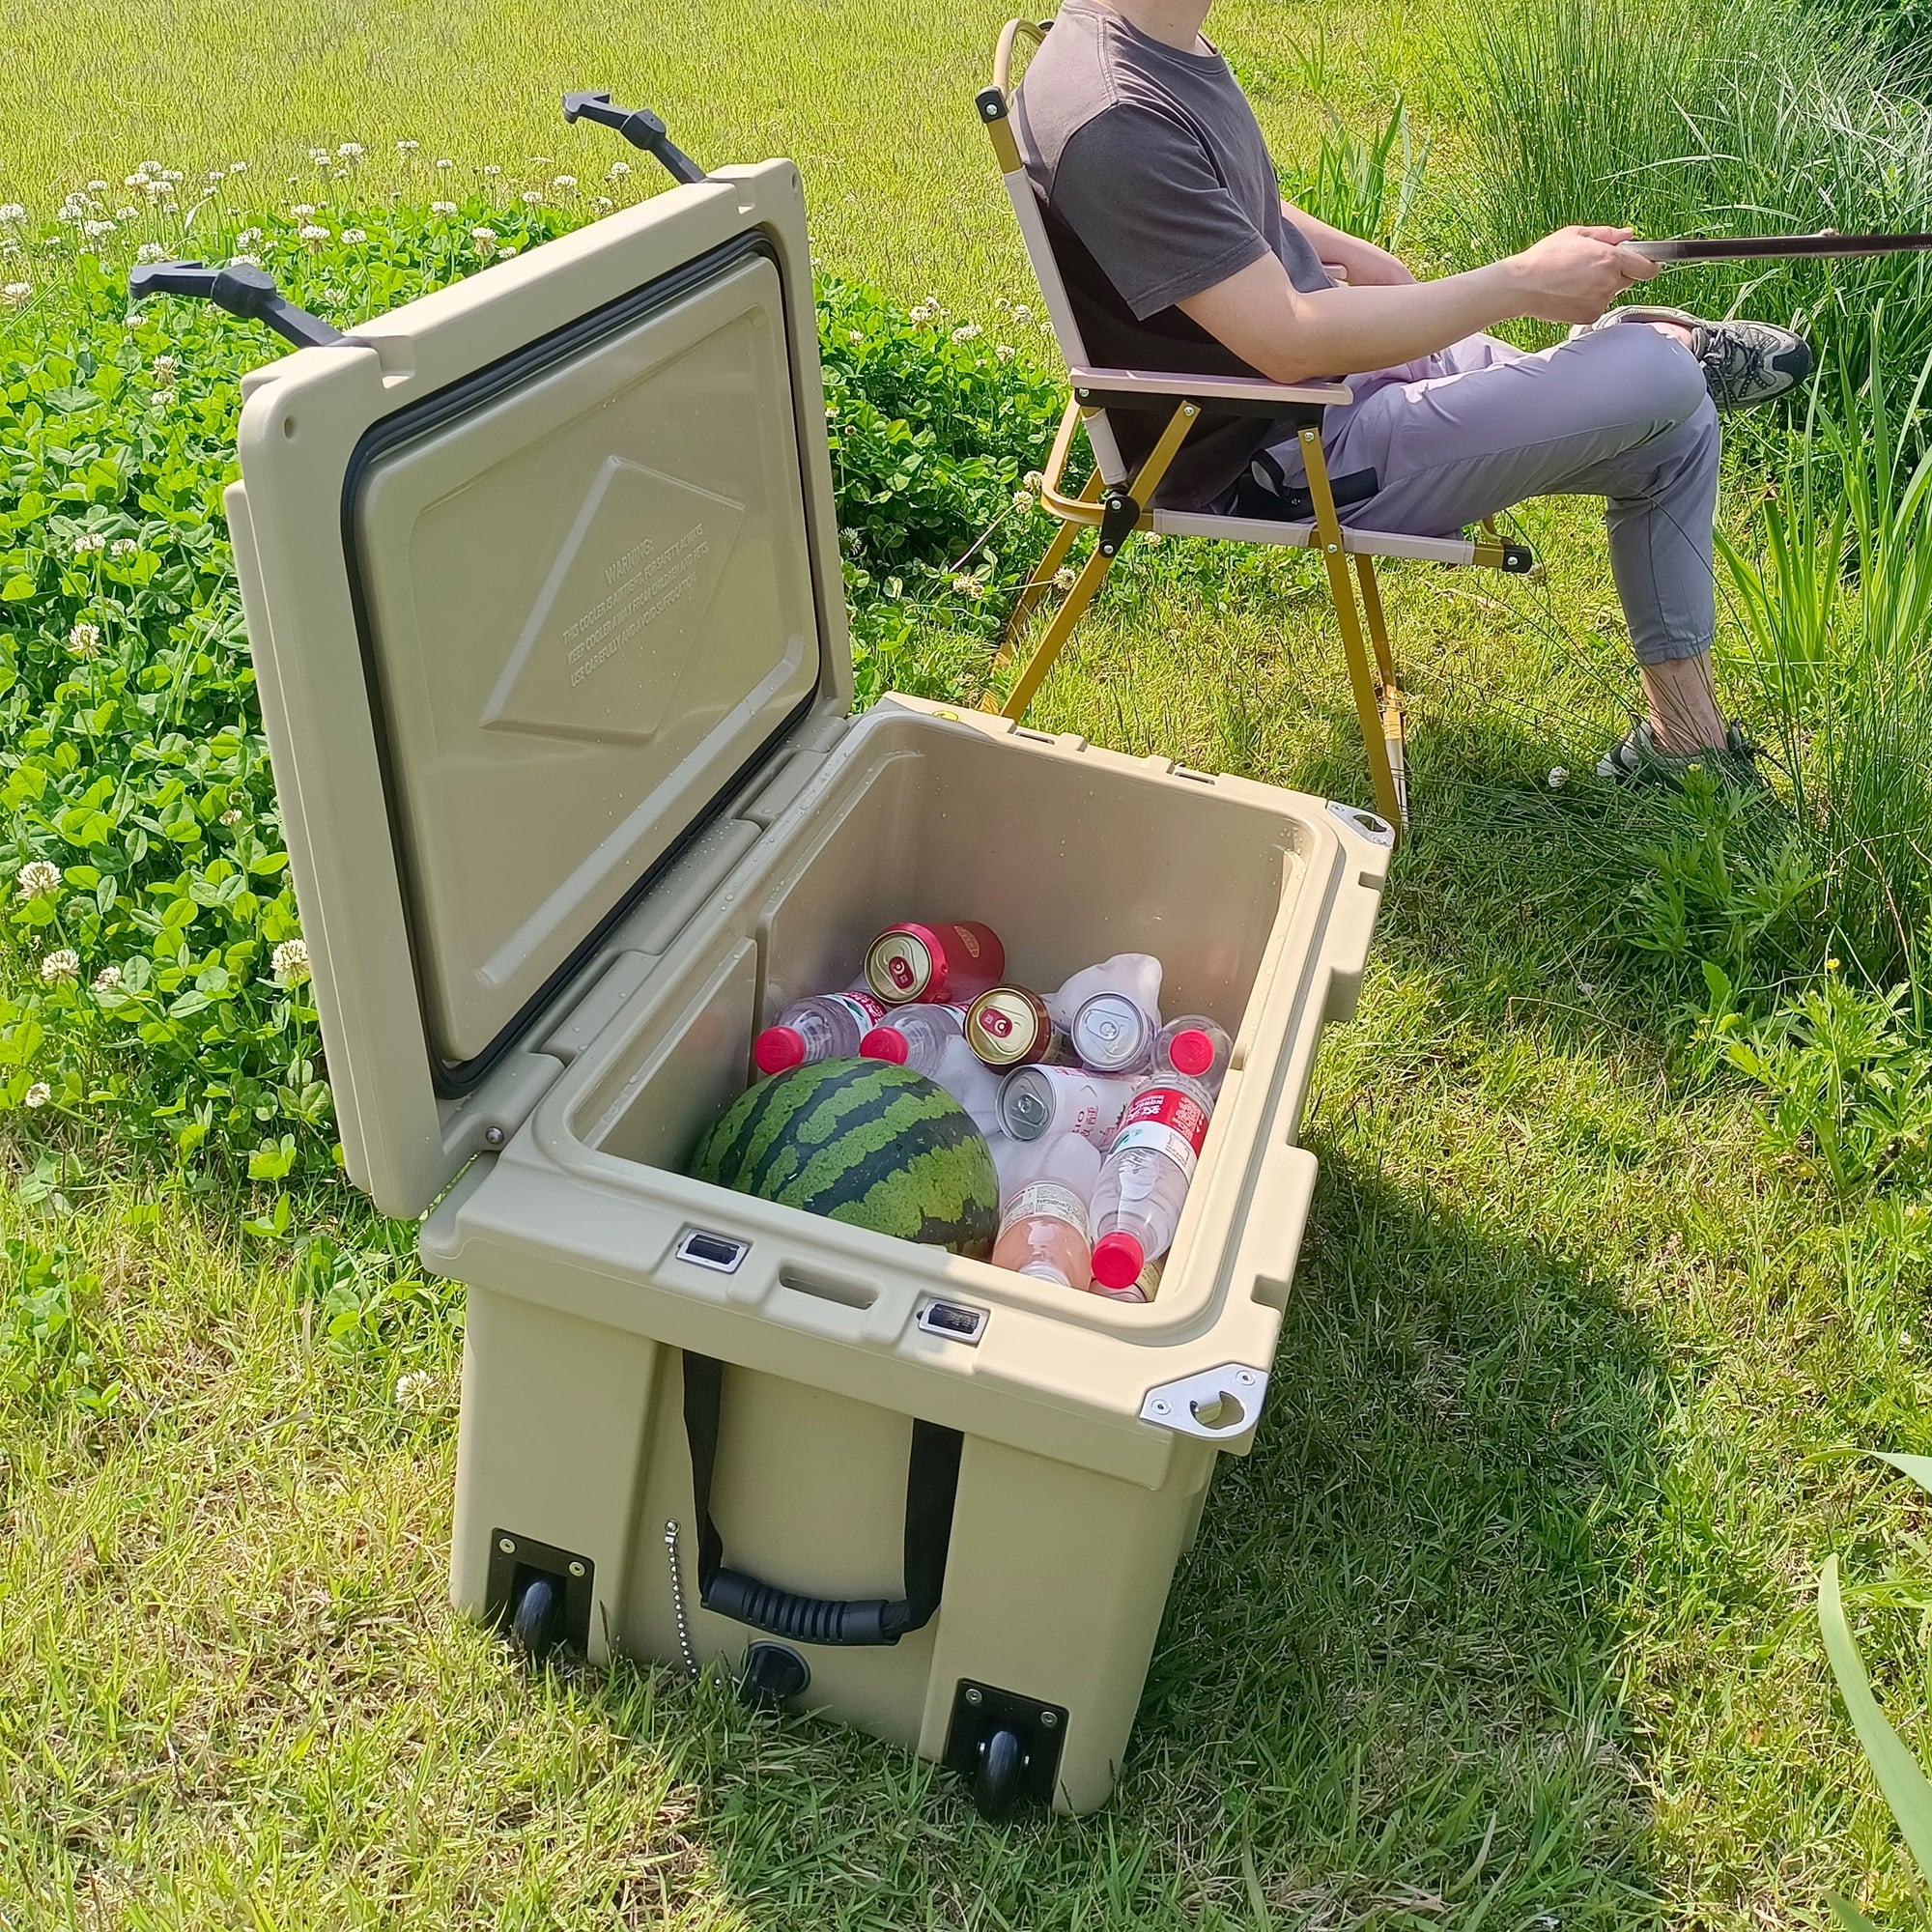 https://ak1.ostkcdn.com/images/products/is/images/direct/96fbee3ce62d1c32730cb19eb800f4a82dde7873/65-qt.-Outdoor-Portable-Ice-Chest-Camping-Cooler-with-Wheels.jpg